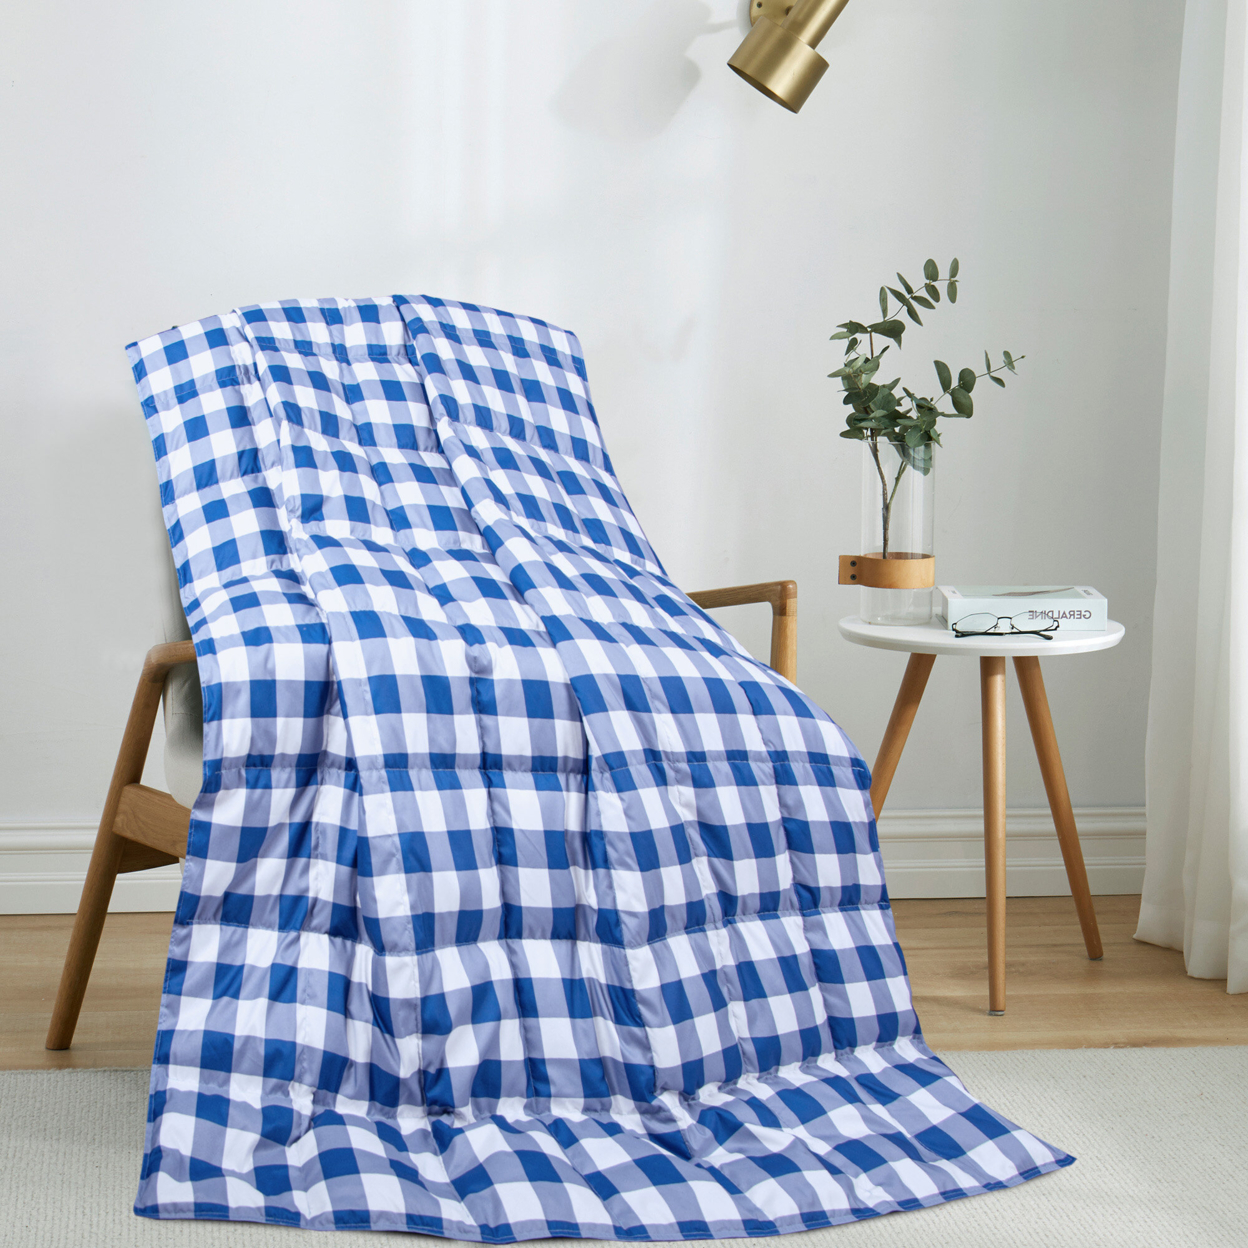 Natural Down Blanket Filled With UltraFeather And Down, Throw Blanket (50 X 70) Sewn Through Box Design - White And Blue